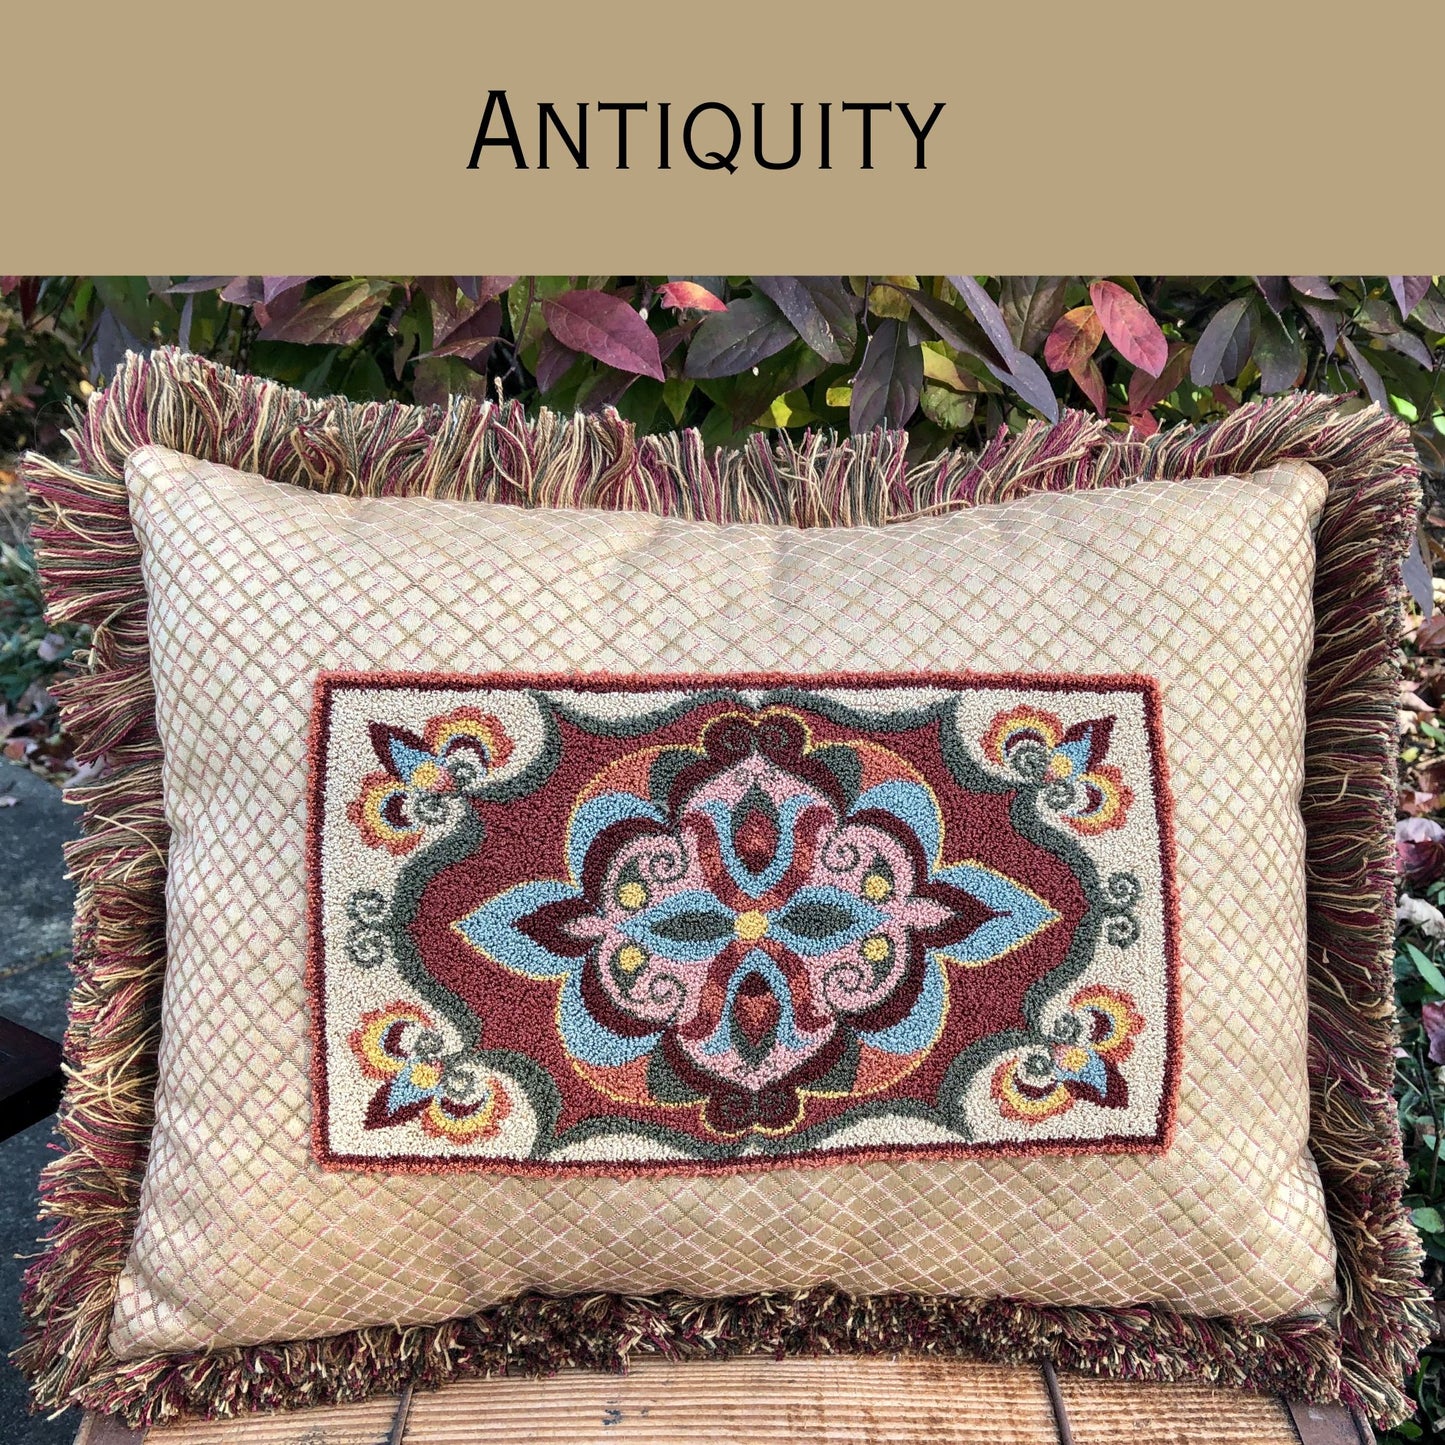  Antiquity Design- Punch Needle Pattern, PDF Digital Download Pattern By Orphaned Wool